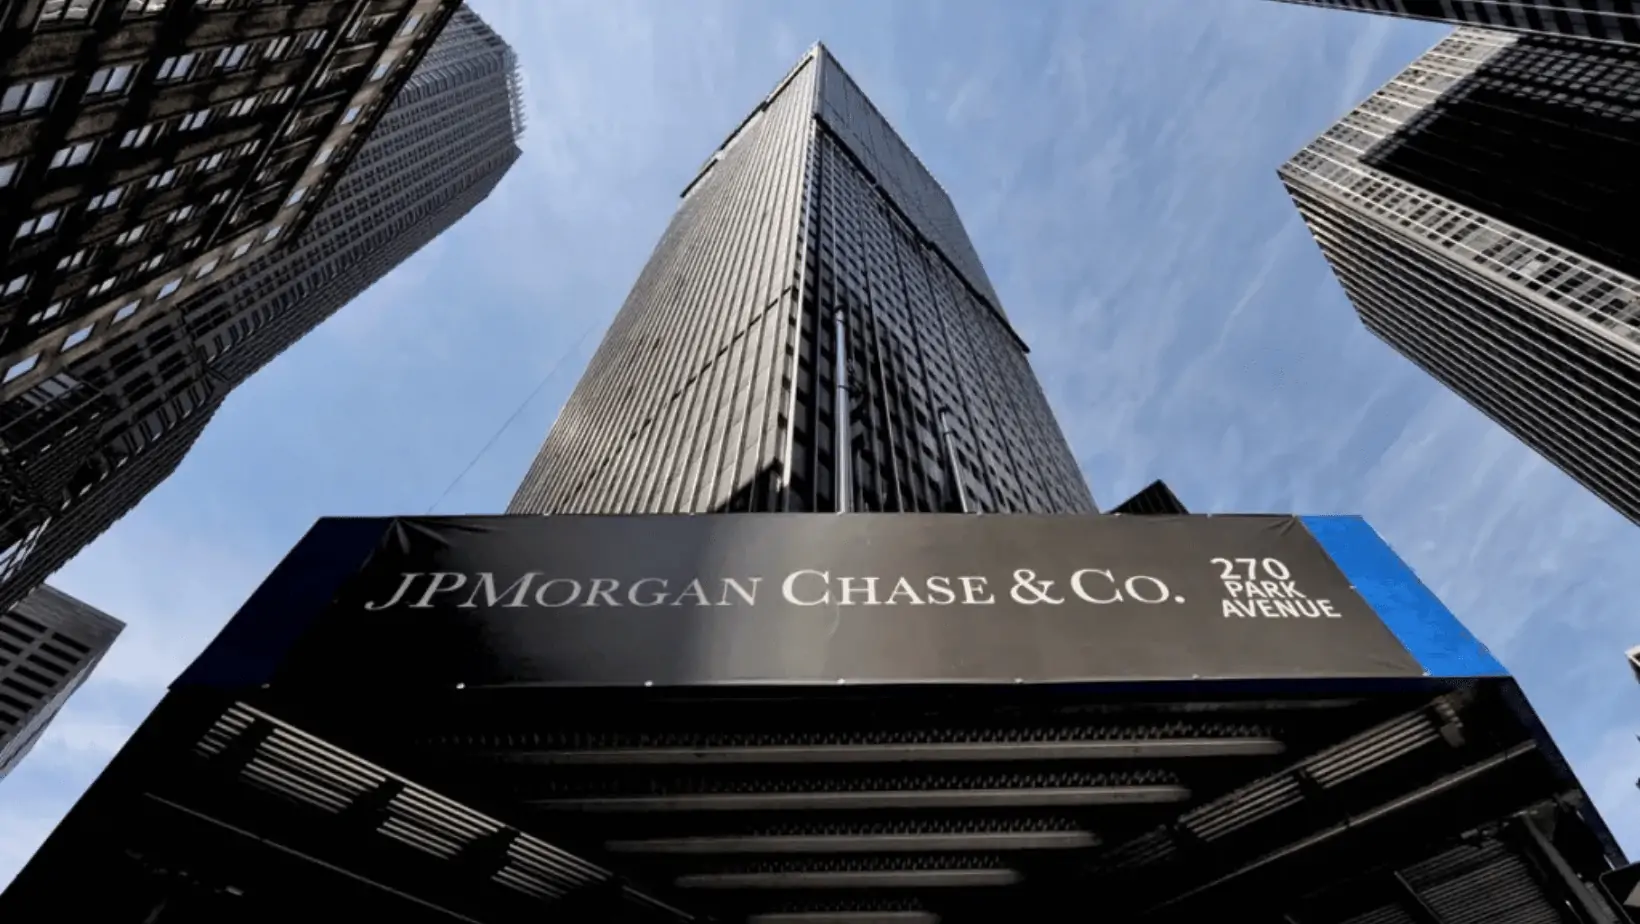 JP Morgan Chase & Co. Acquires 5.64% Stake in Sibanye-Stillwater